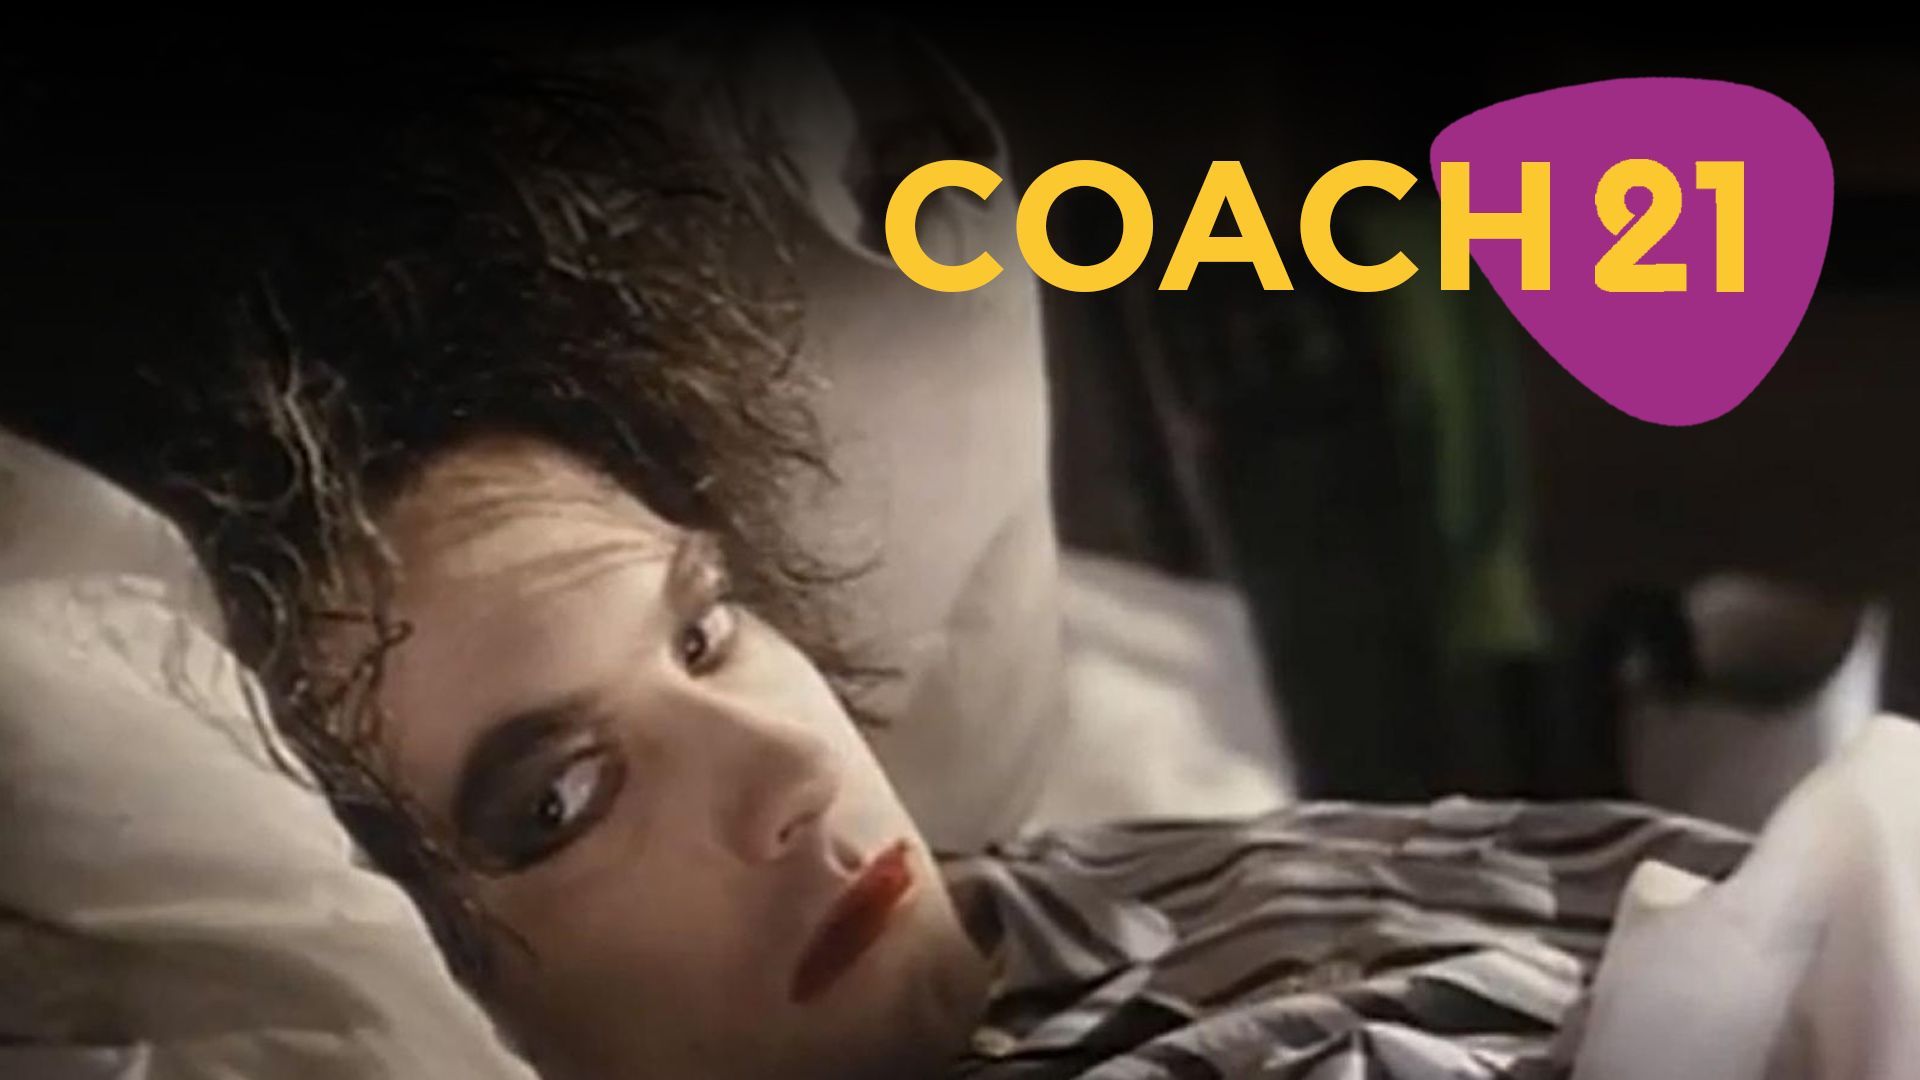 [Coach 21] The Cure - Lullaby